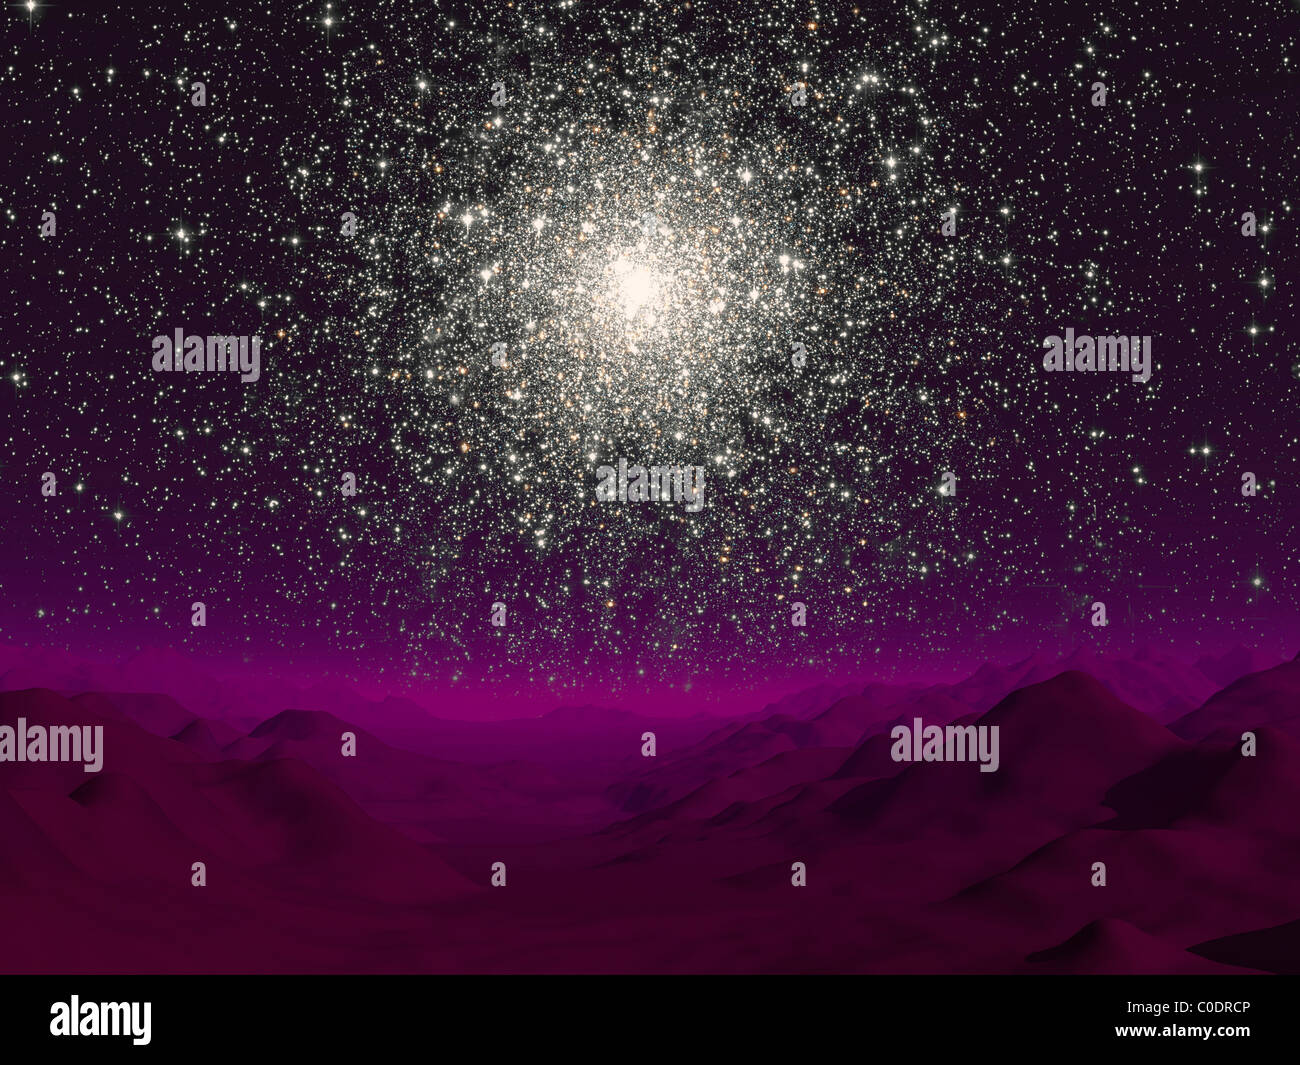 Illustration of a globular cluster over the terrain of a barren planet. Stock Photo